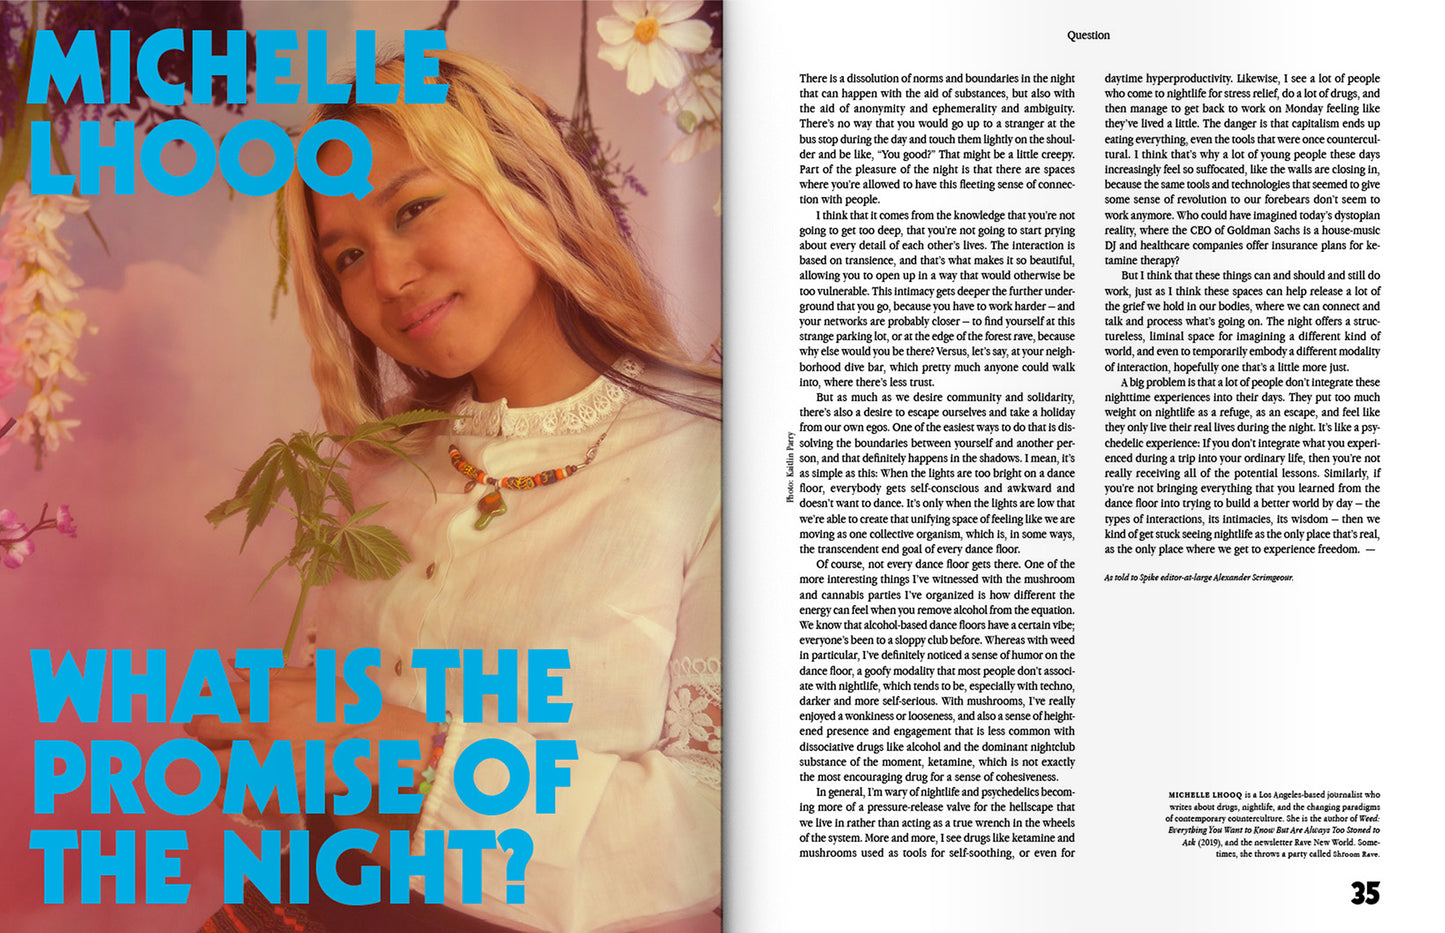 Spike ePaper (Issue 78): The Night